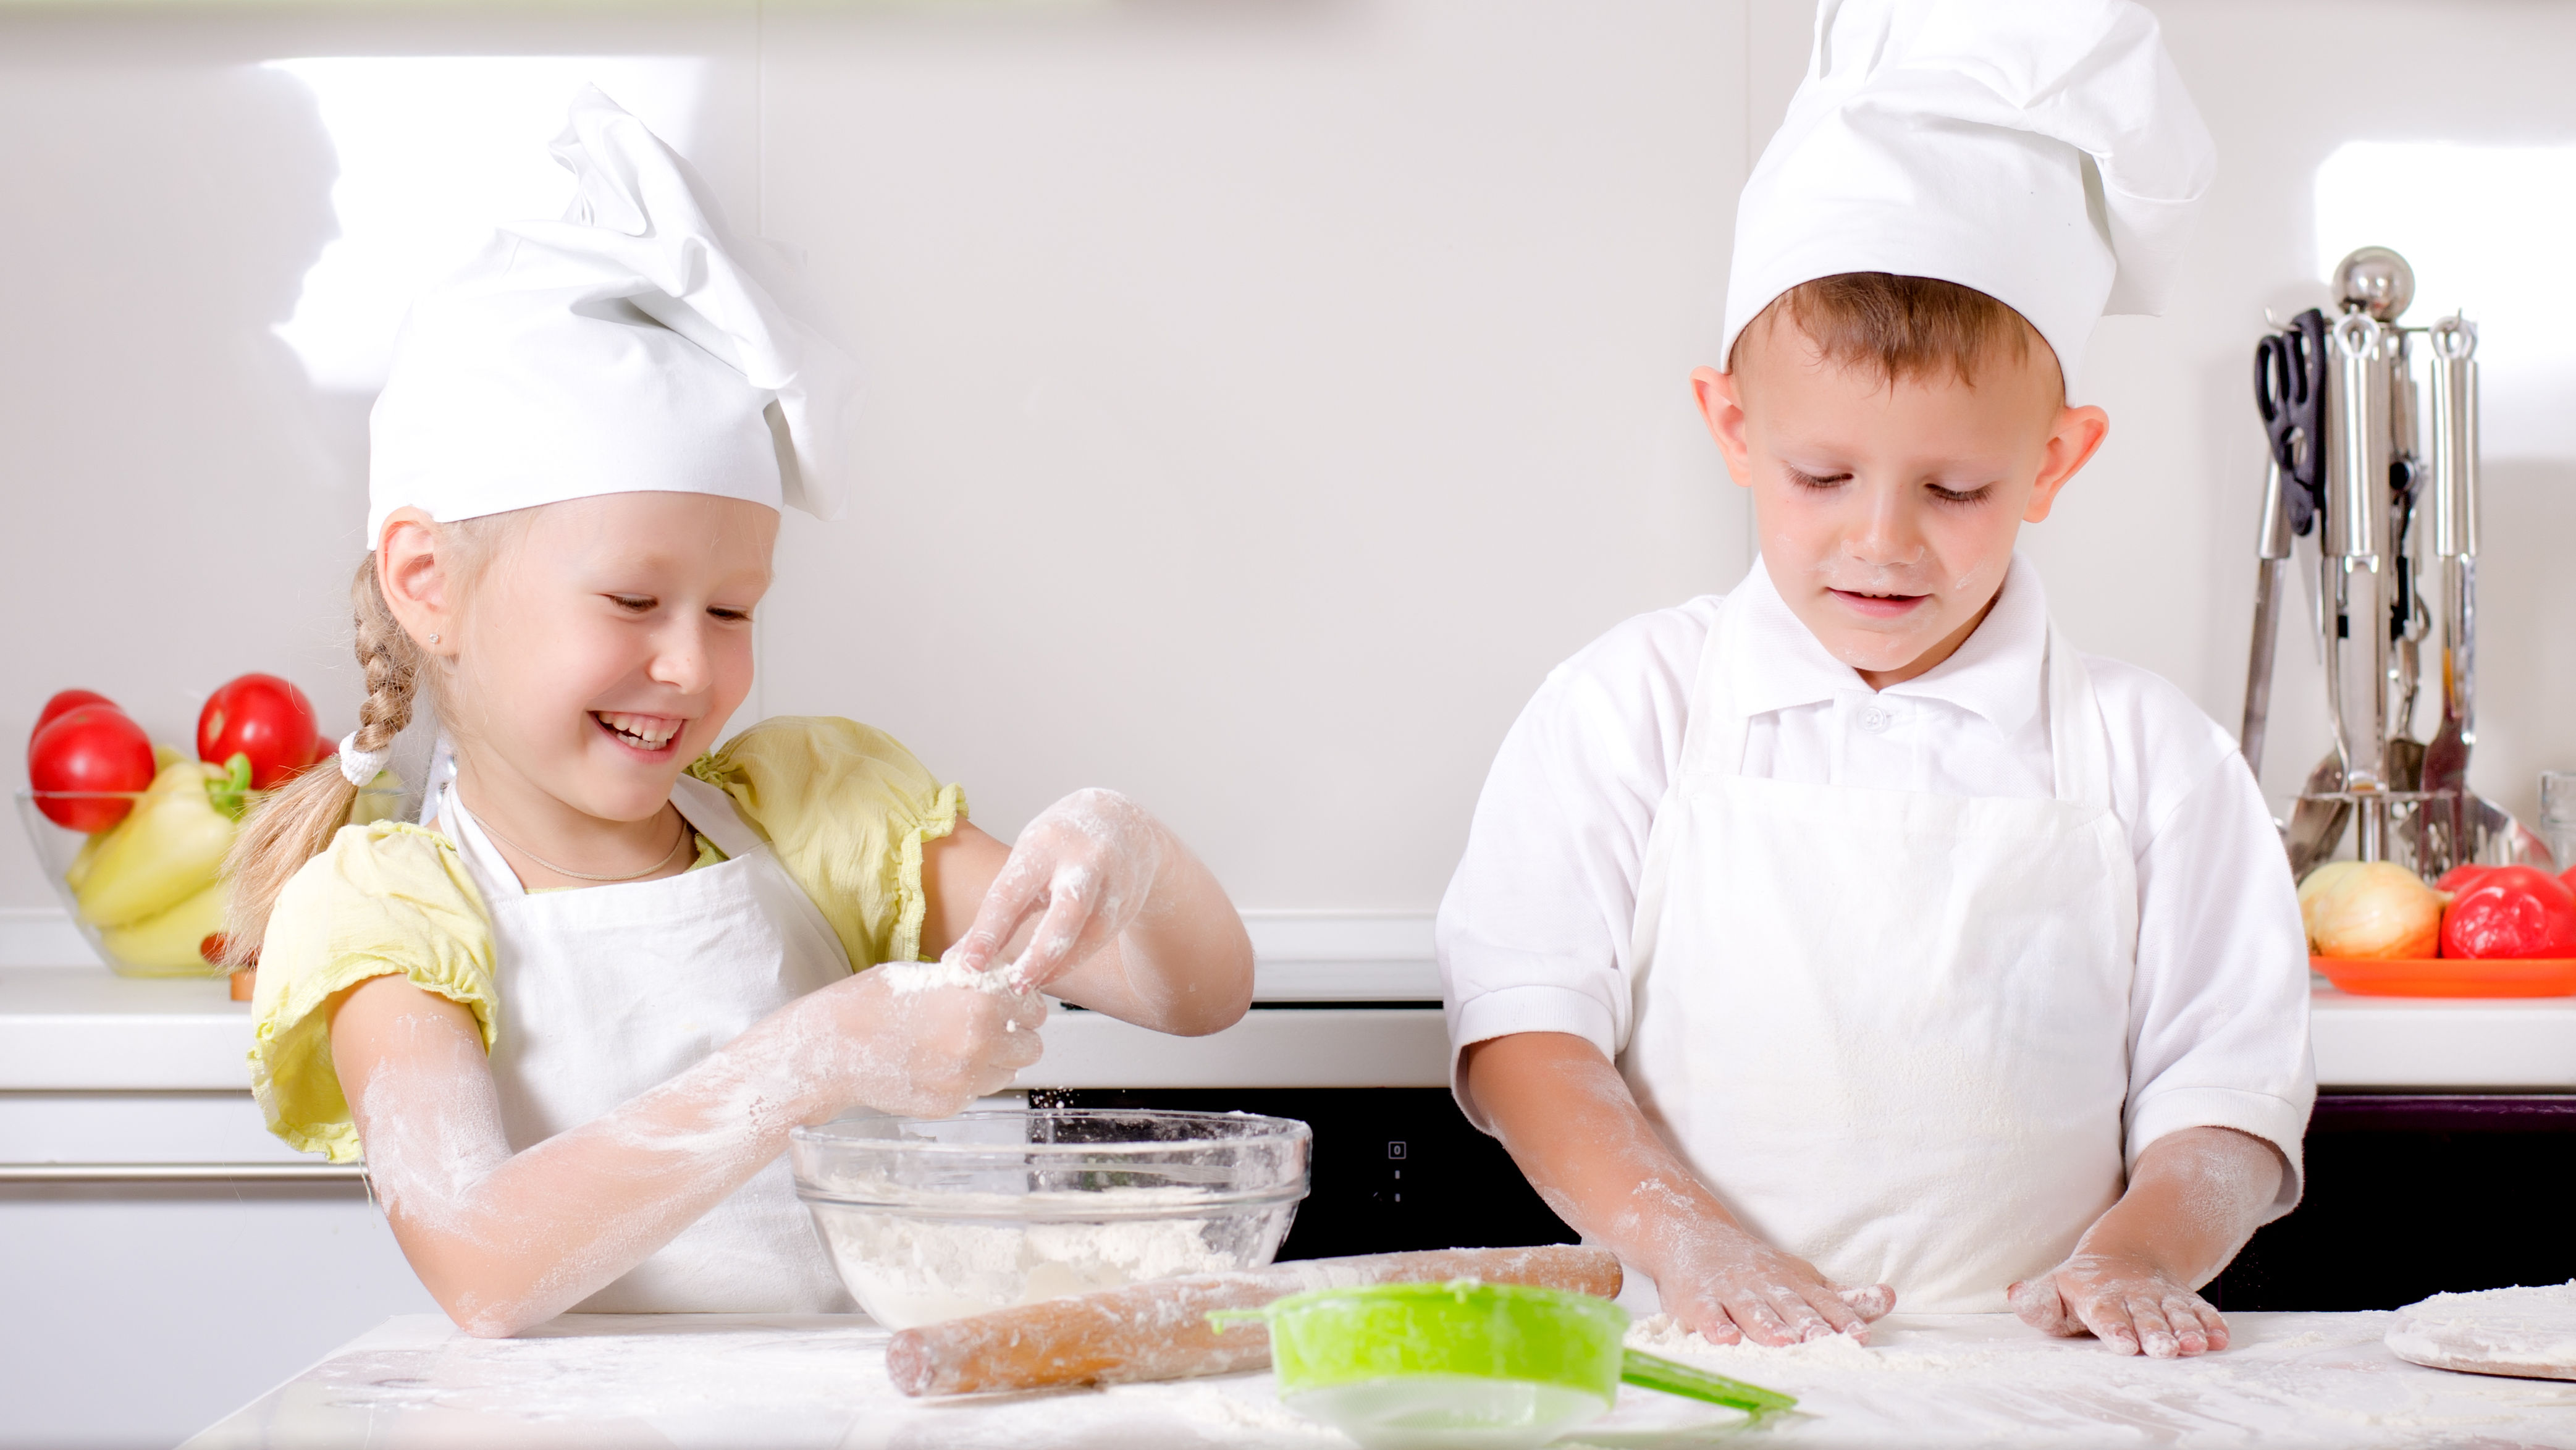 Why Enrol Your Child In A Cooking Program